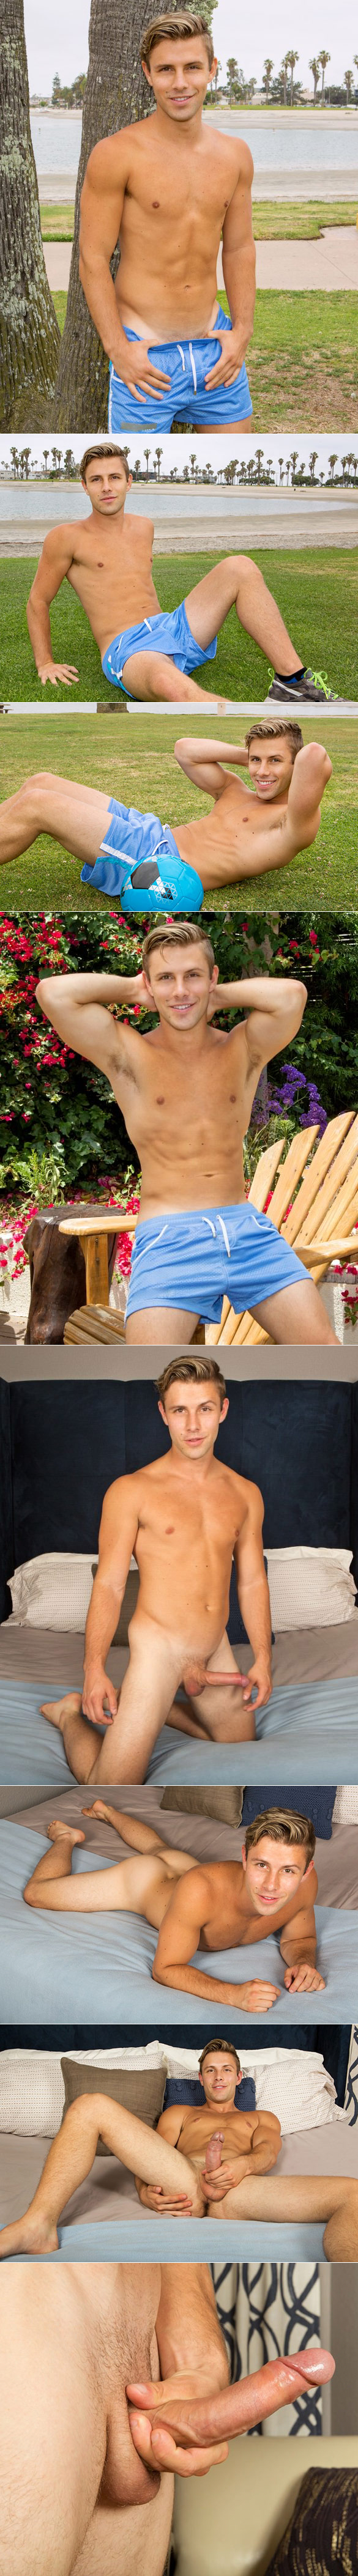 Sean Cody: Dylan rubs one out